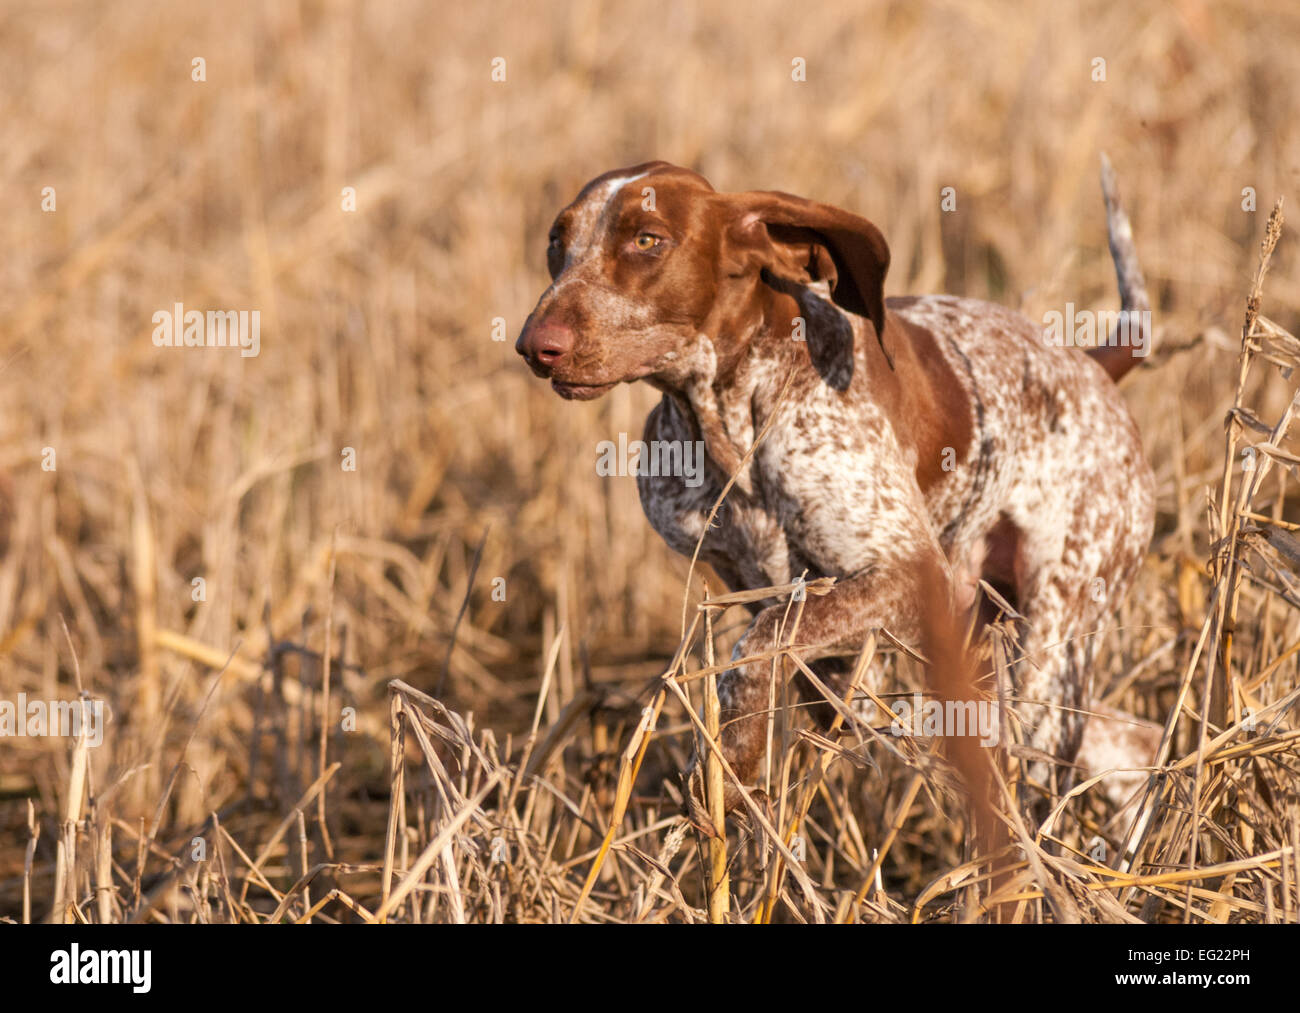 A Bracco Italiano, also called an Italian Pointer or Italian Pointing Dog running through a field crop Stock Photo